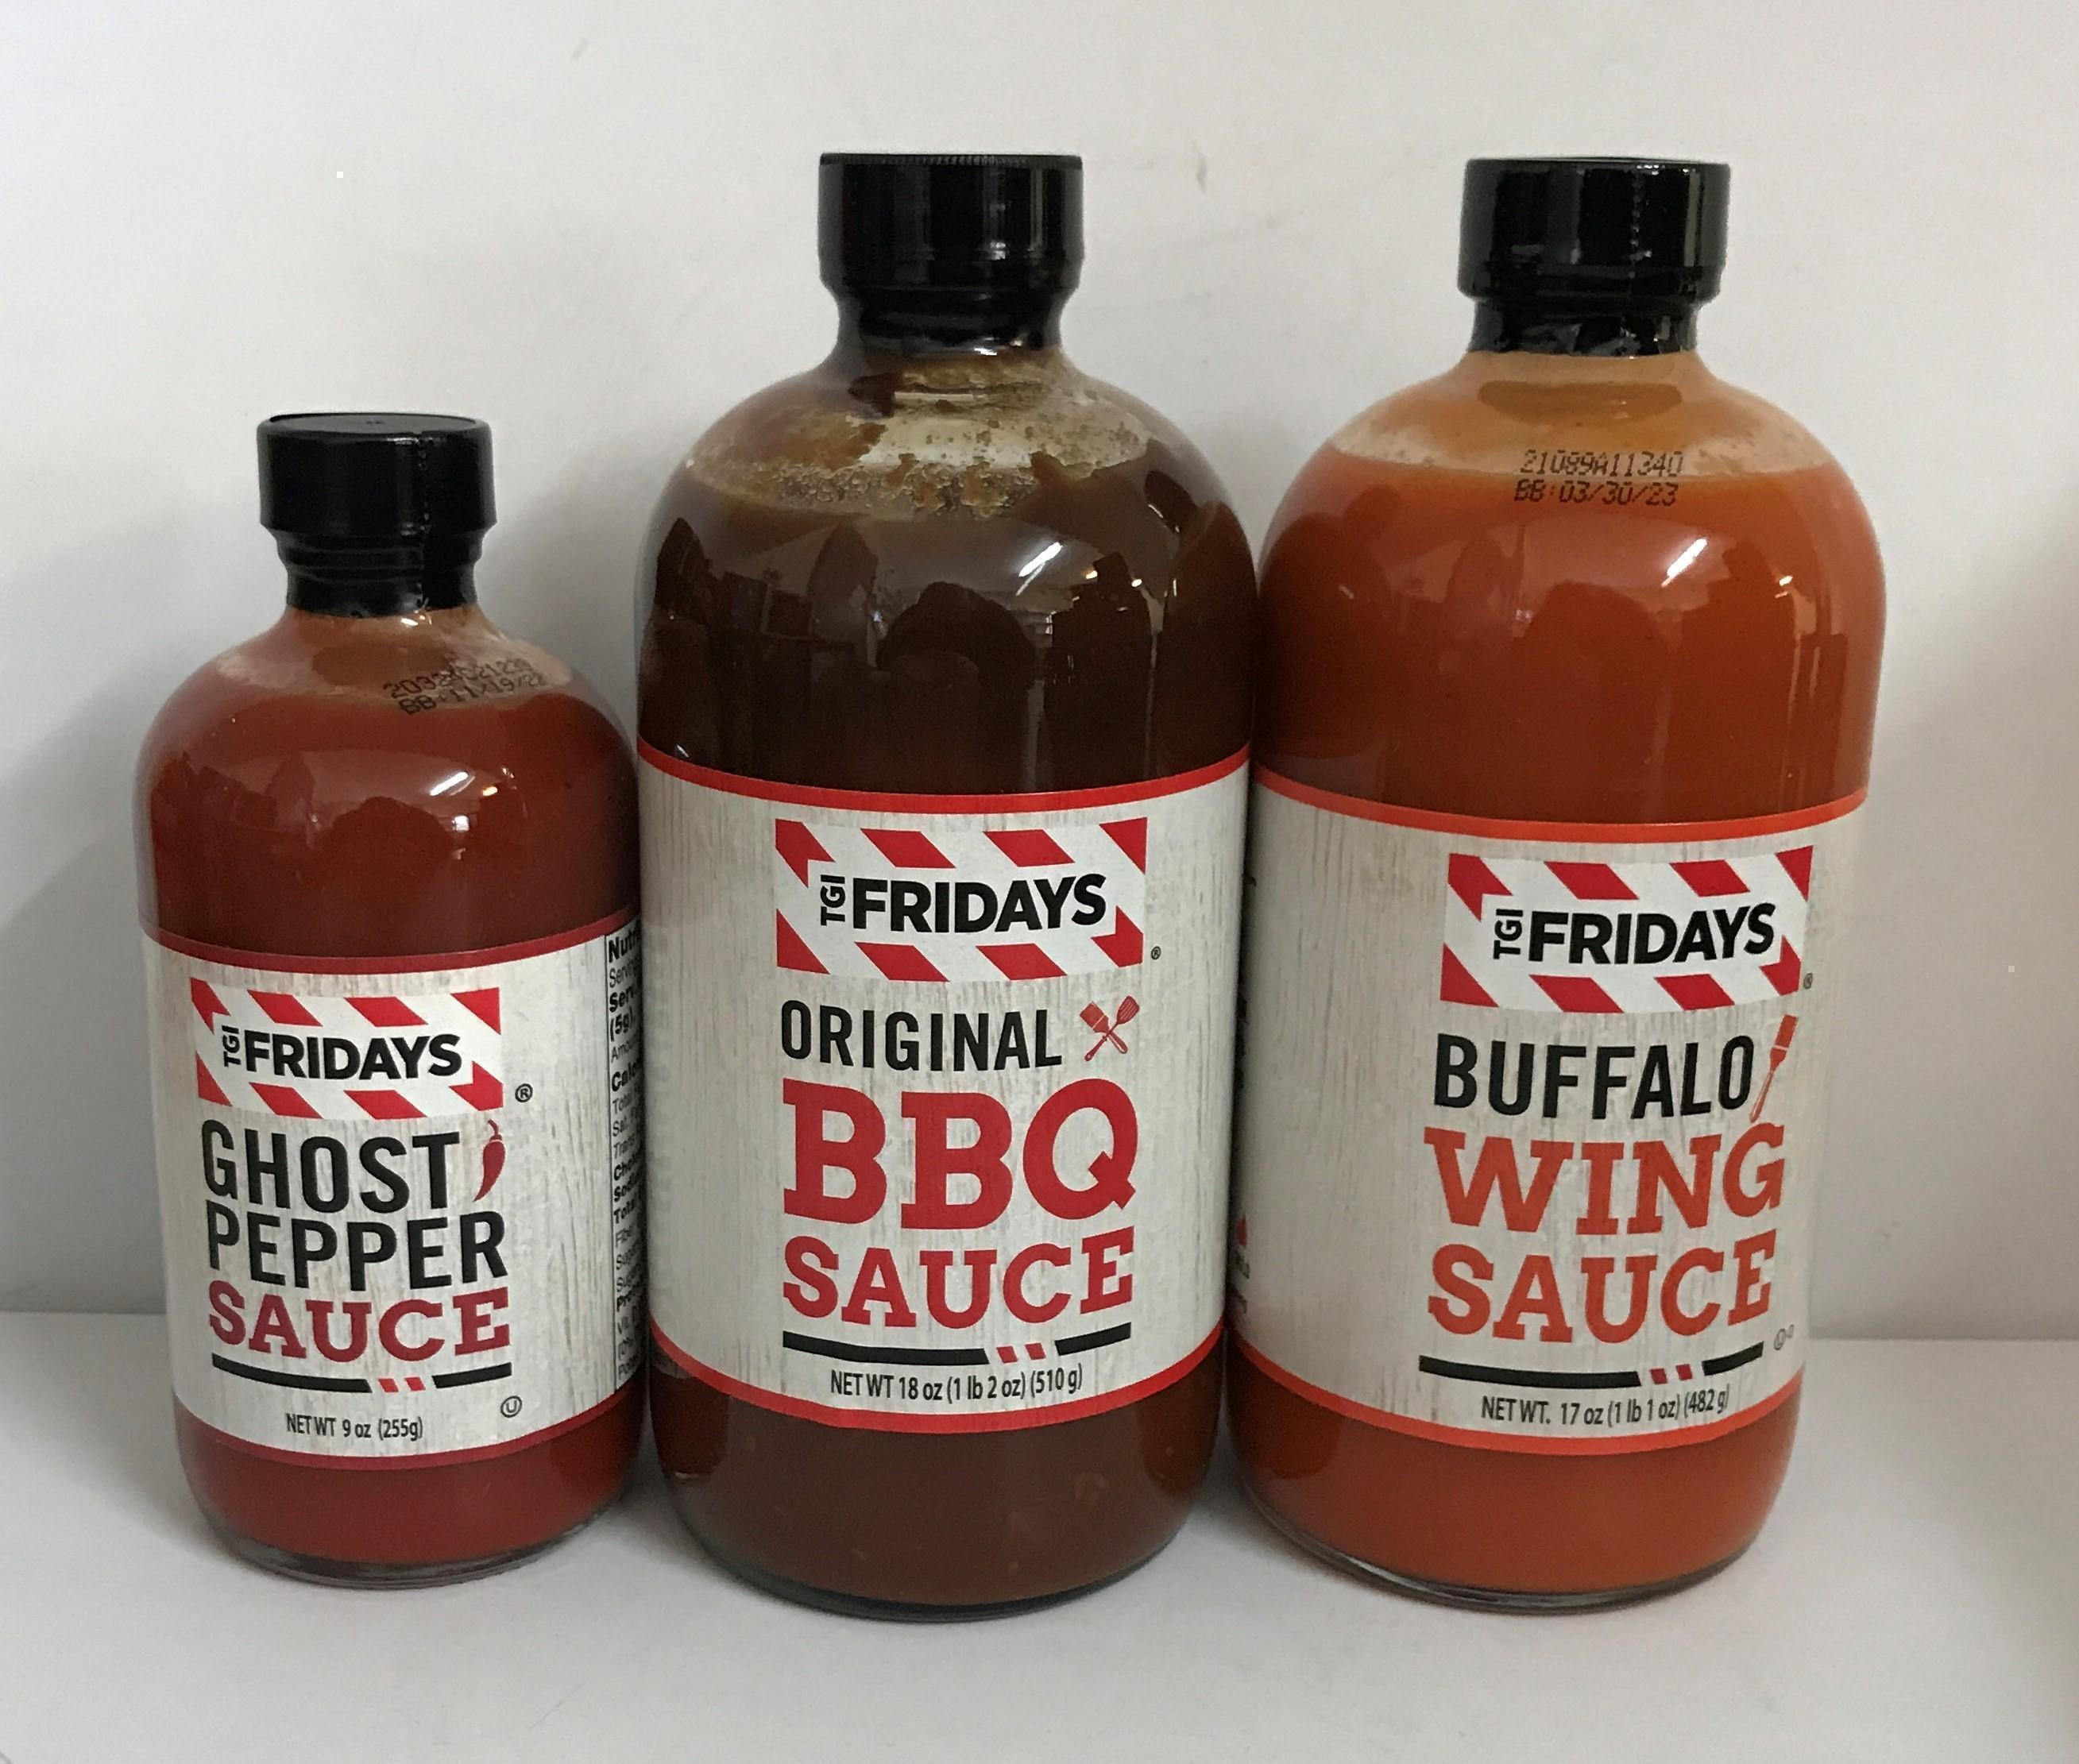 Gift Pack With TGI Fridays Sauce - Original BBQ 510g, Buffalo Wing 482g & Ghost Pepper 255g in Gold Bag